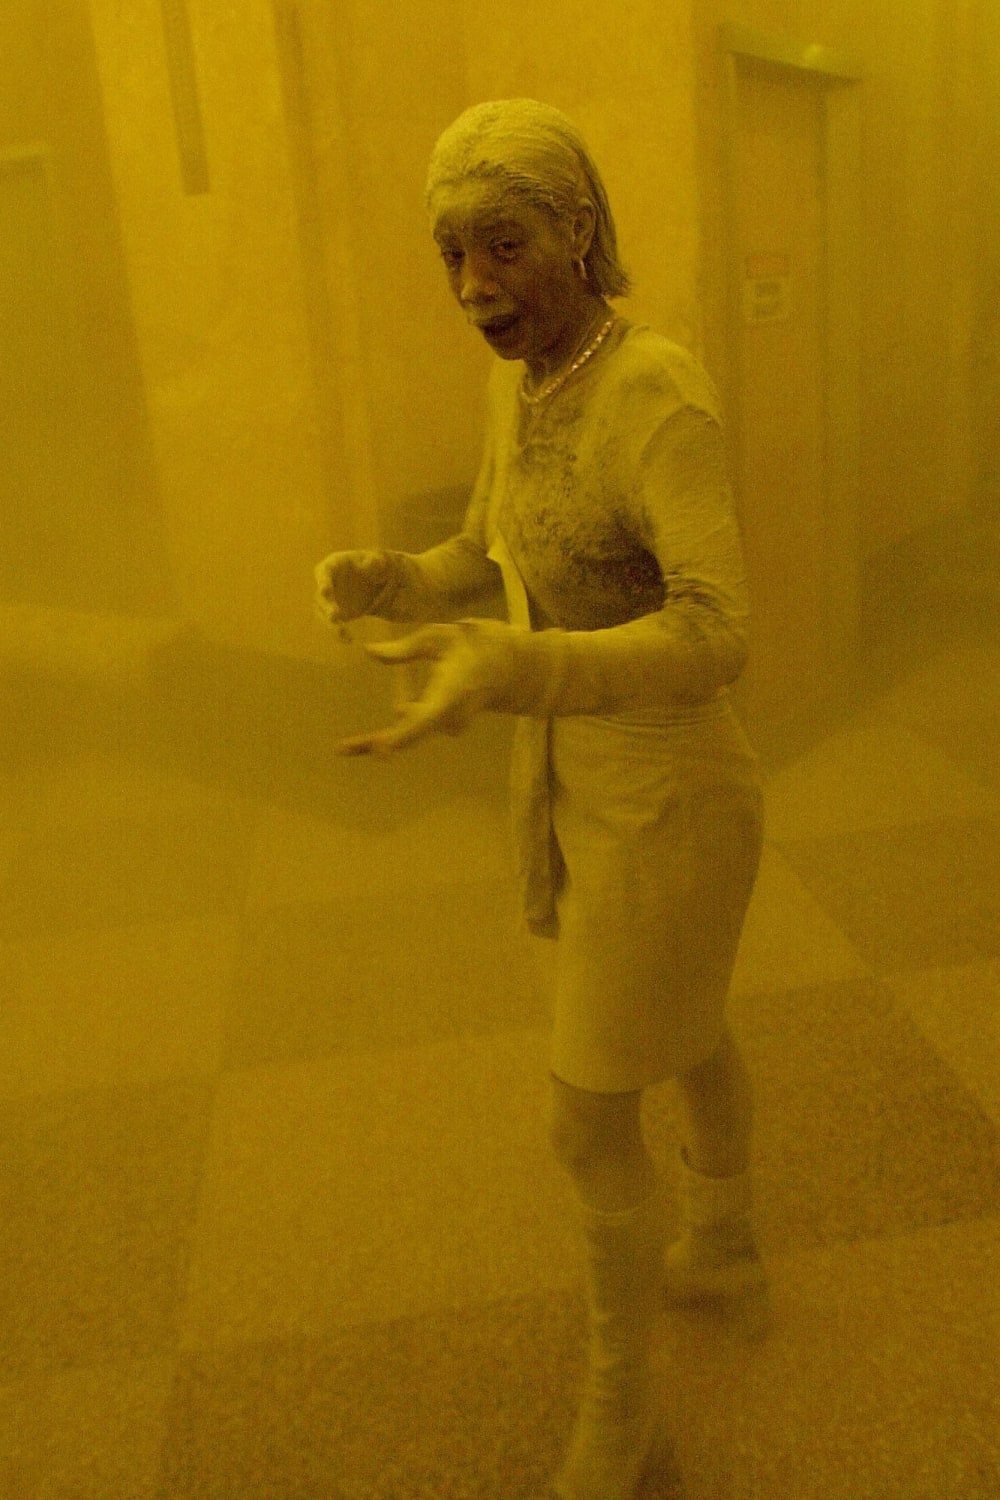 28-year-old Marcy Borders, who worked at the Bank of America located in the World Trade Center and survived its collapse, is photographed completely covered in dust. September 11 2001